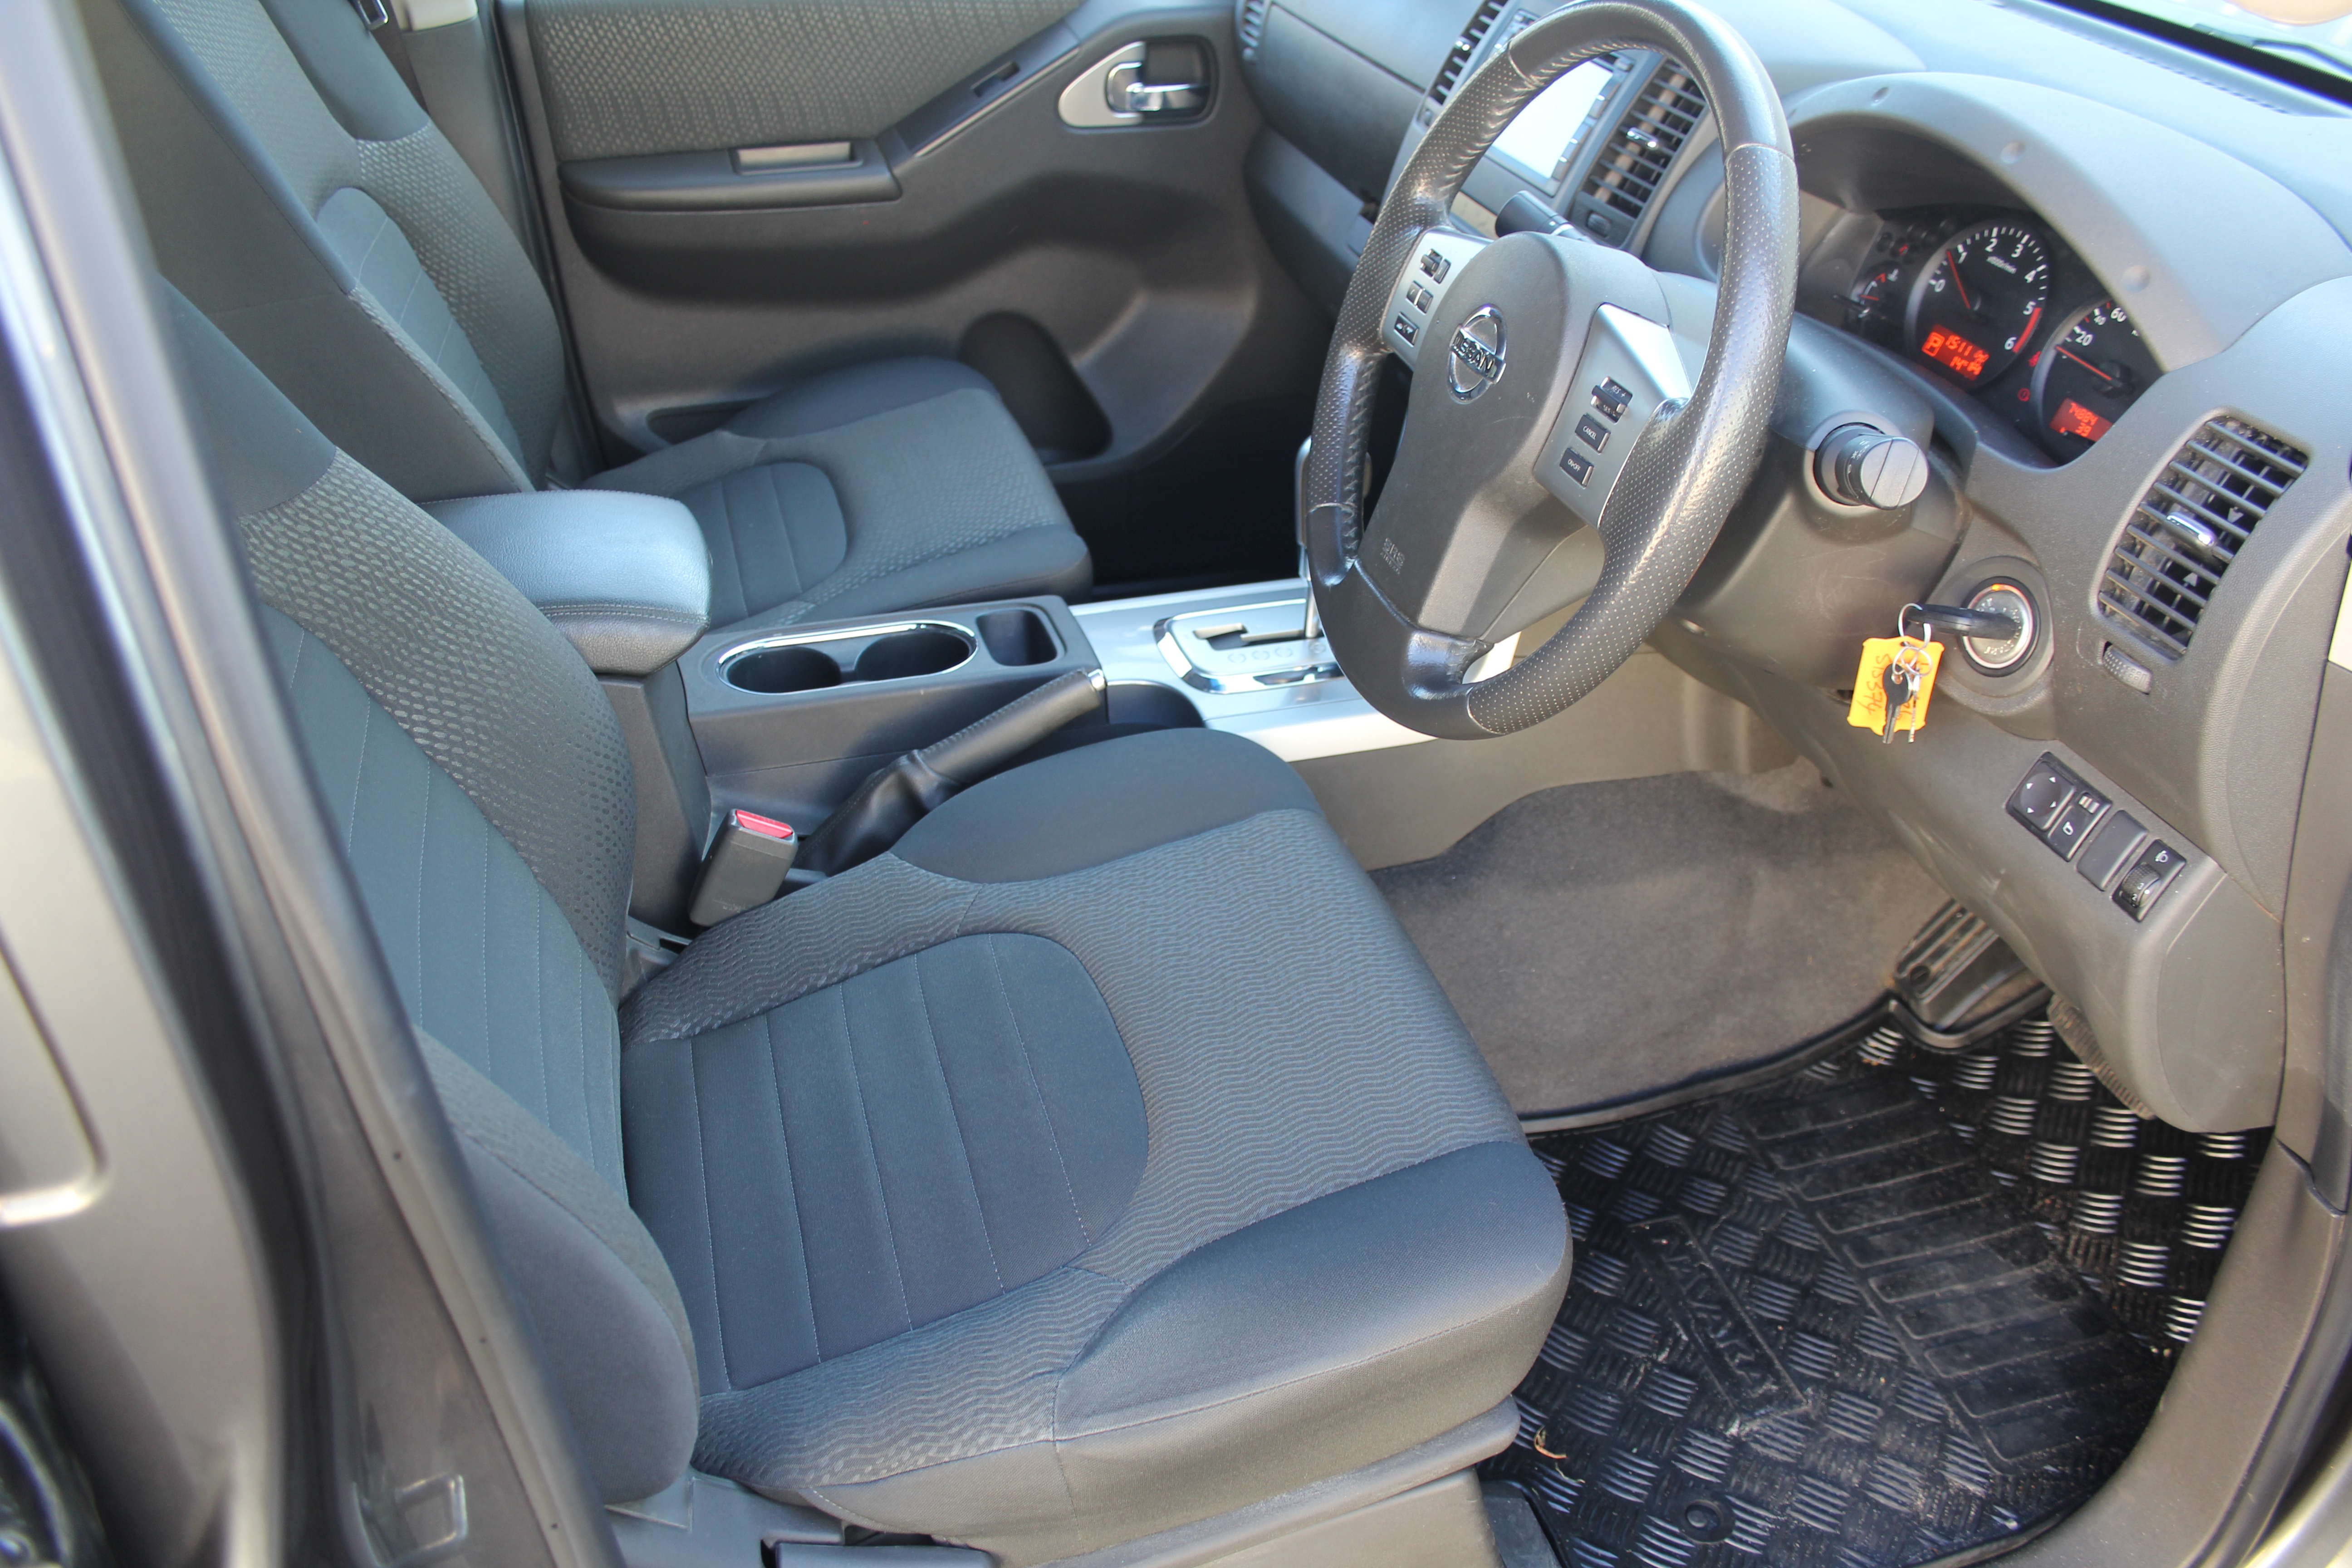 Nissan ST-X 4WD 2014 for sale in Auckland